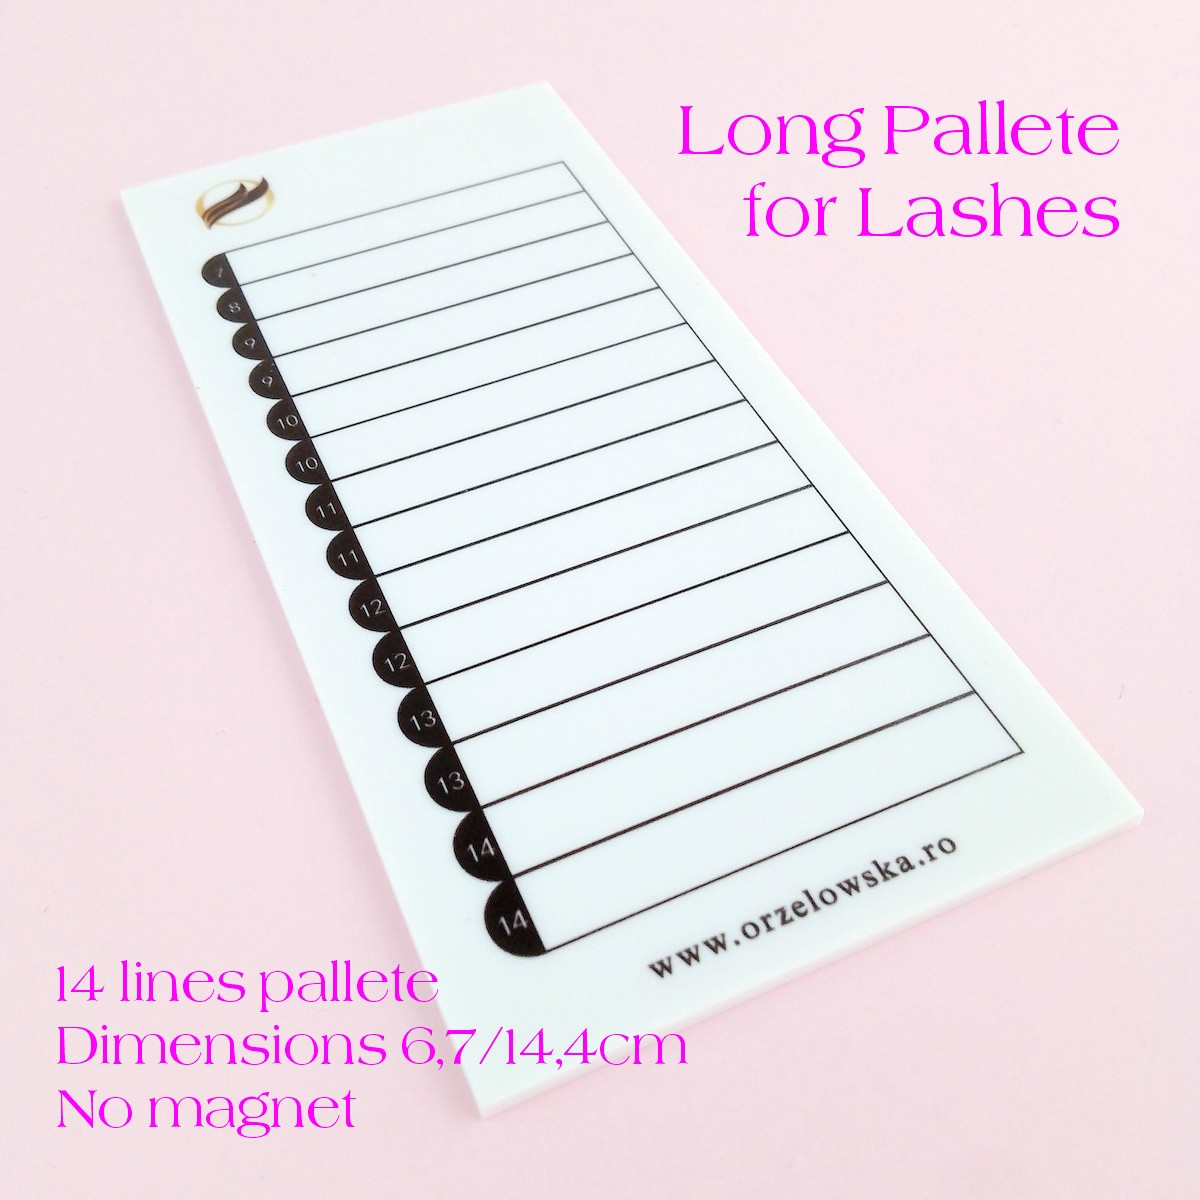 Long pallete for lashes, no magnet, for eyelash extensions